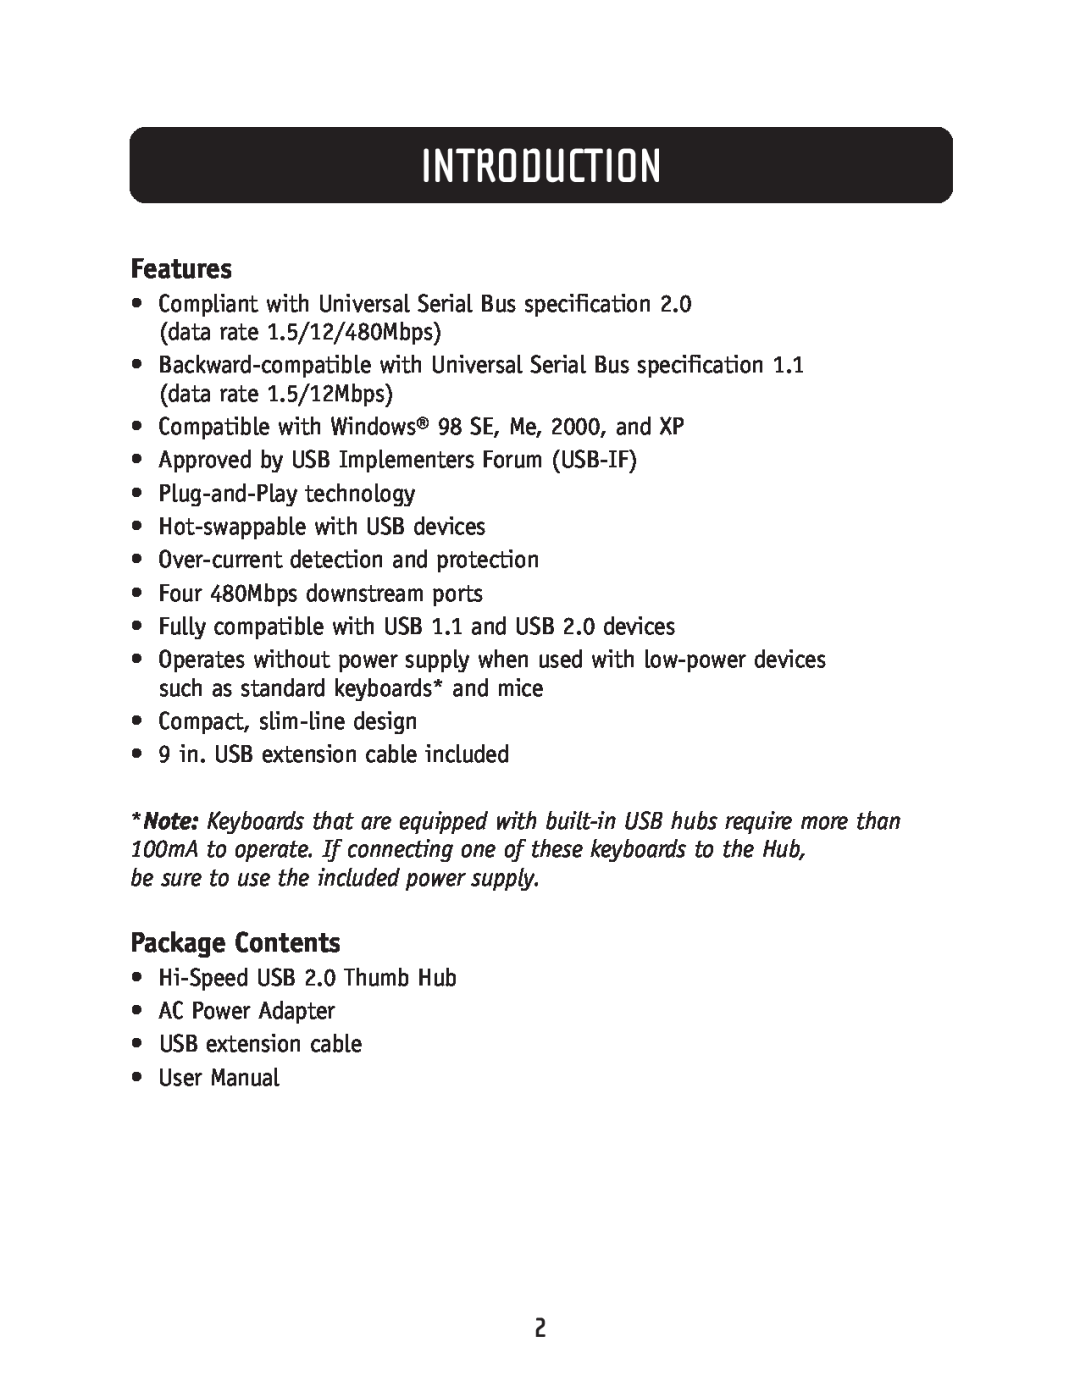 Belkin F5U218-MOB user manual Features, Package Contents, Introduction 